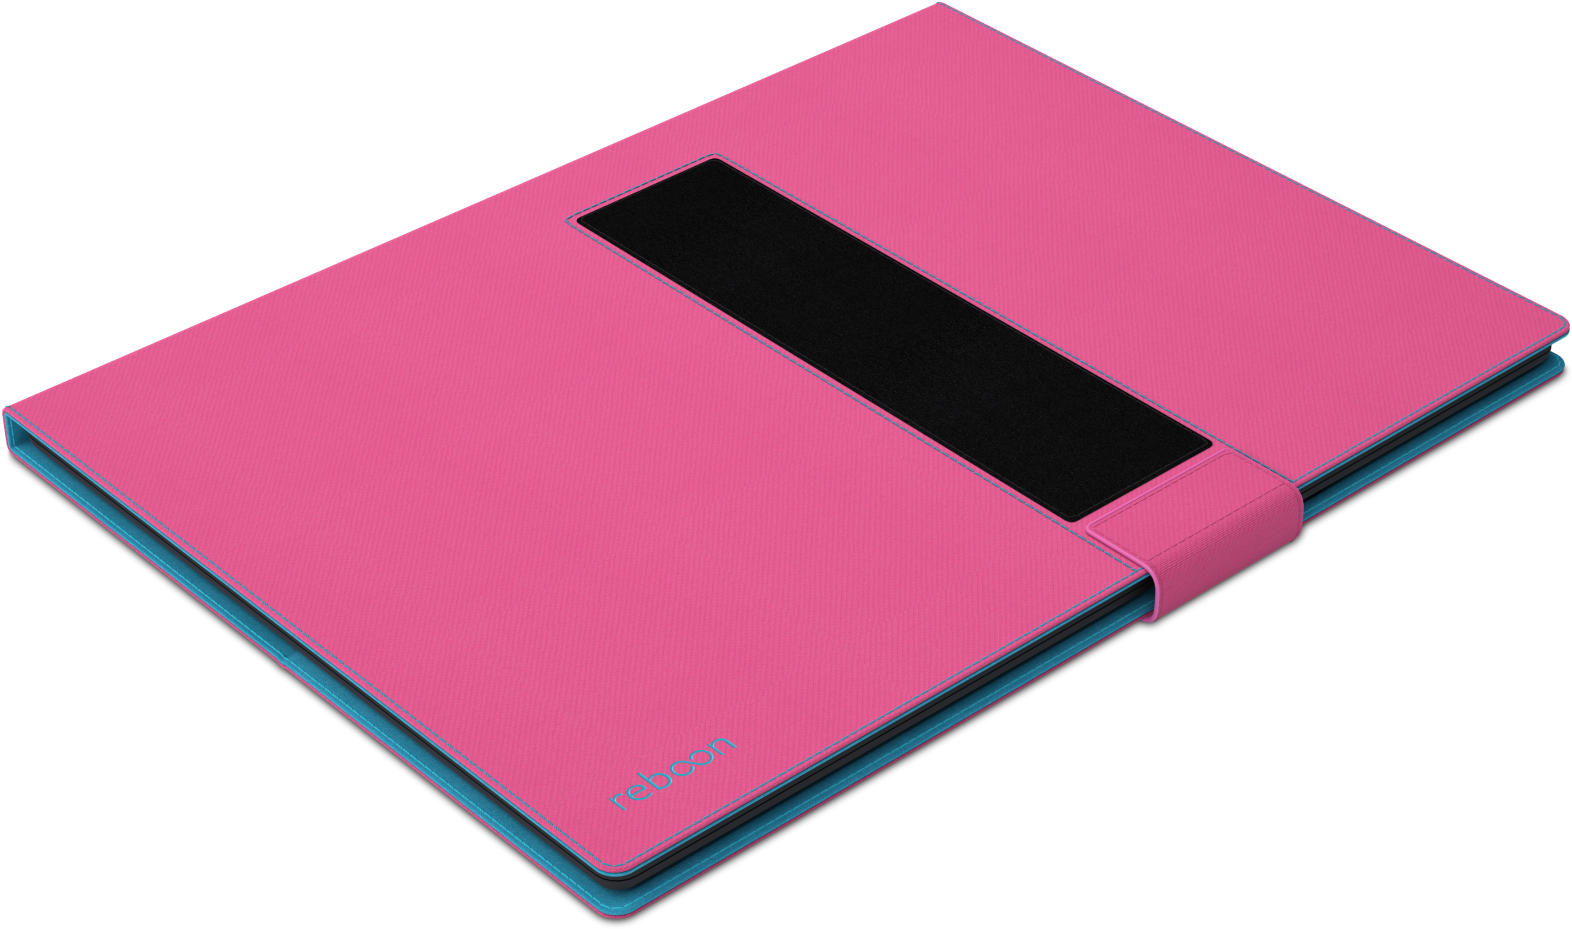 Reboon Booncover L Tablet Case Et Al Ipad 4, Kindle - Funda Para Tablet Reboon Booncover M2 Galaxy Tab Pro (1600x1066), Png Download